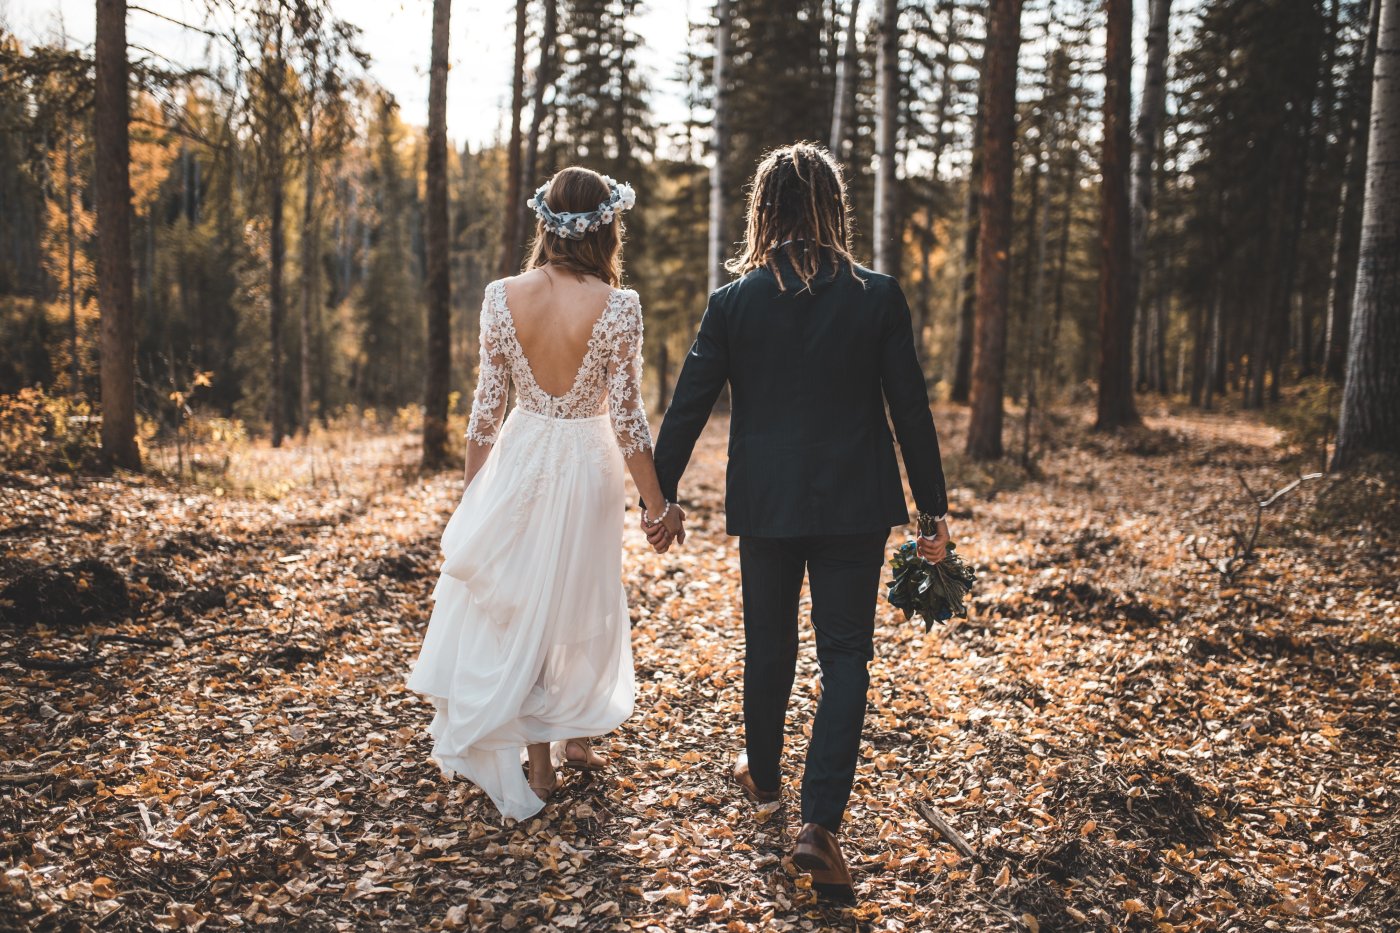 Don’t let the Church dictate how we marry